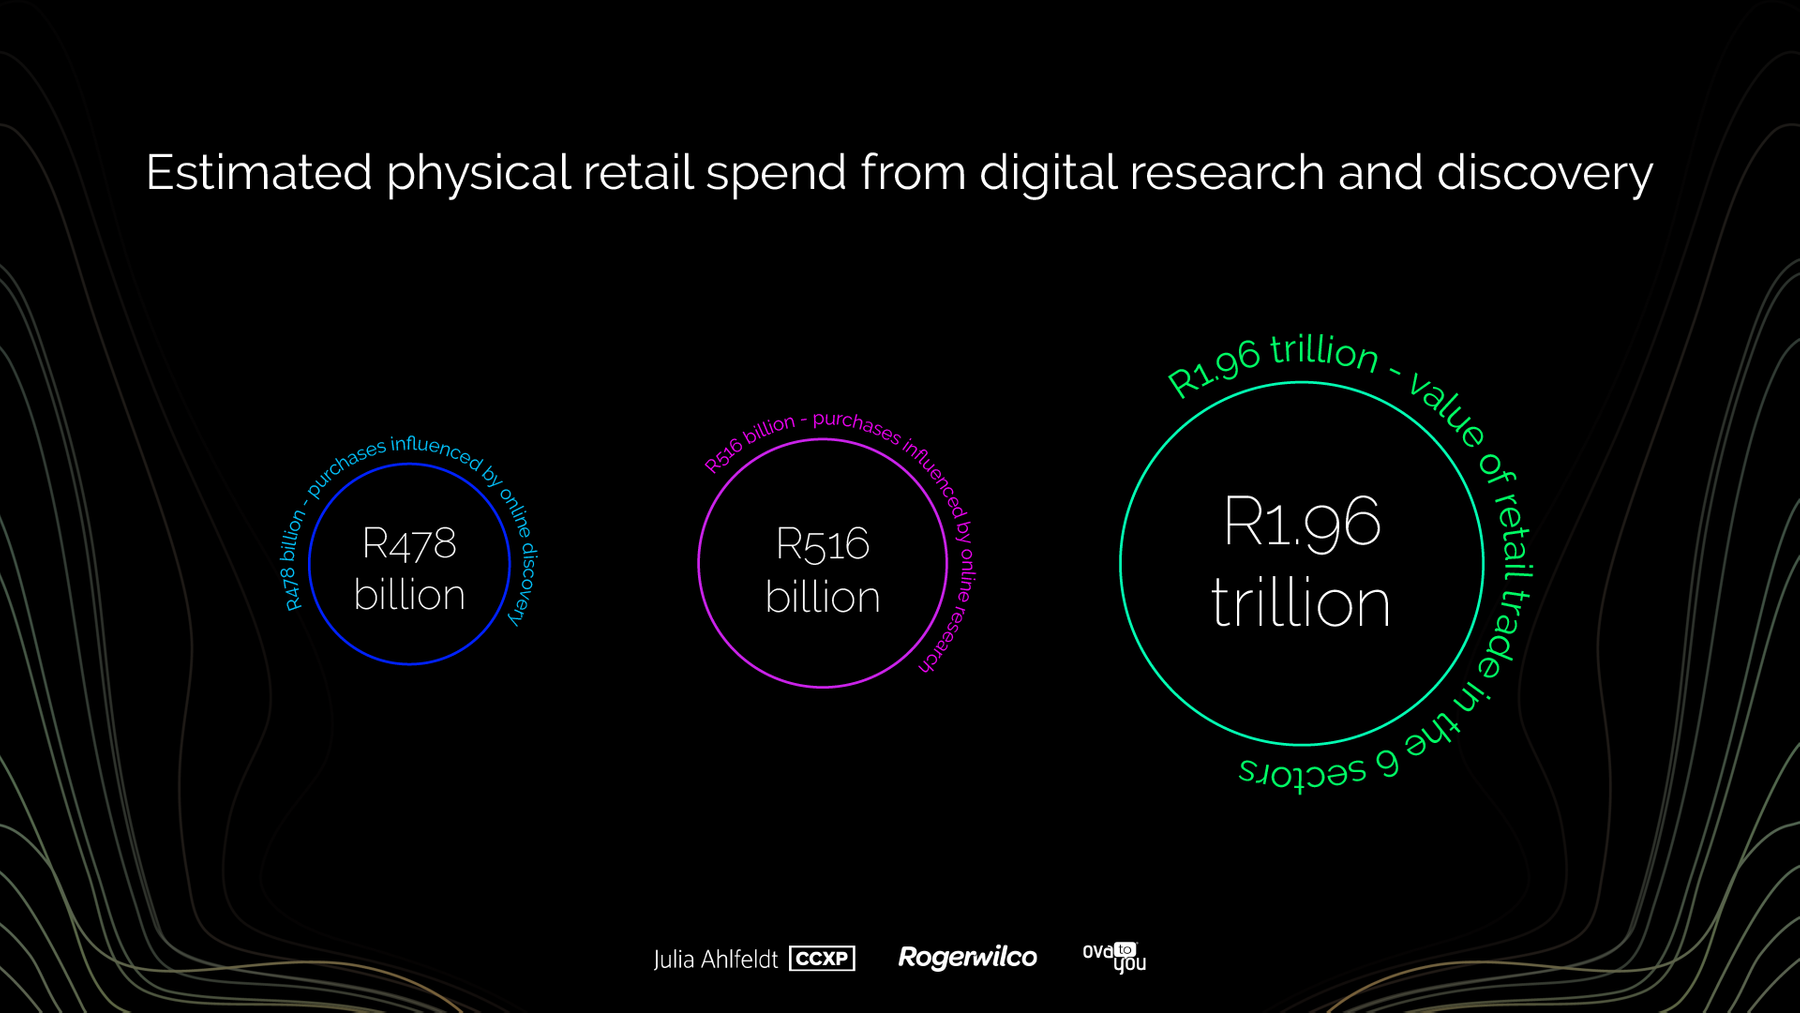 Estimated physical retail spend